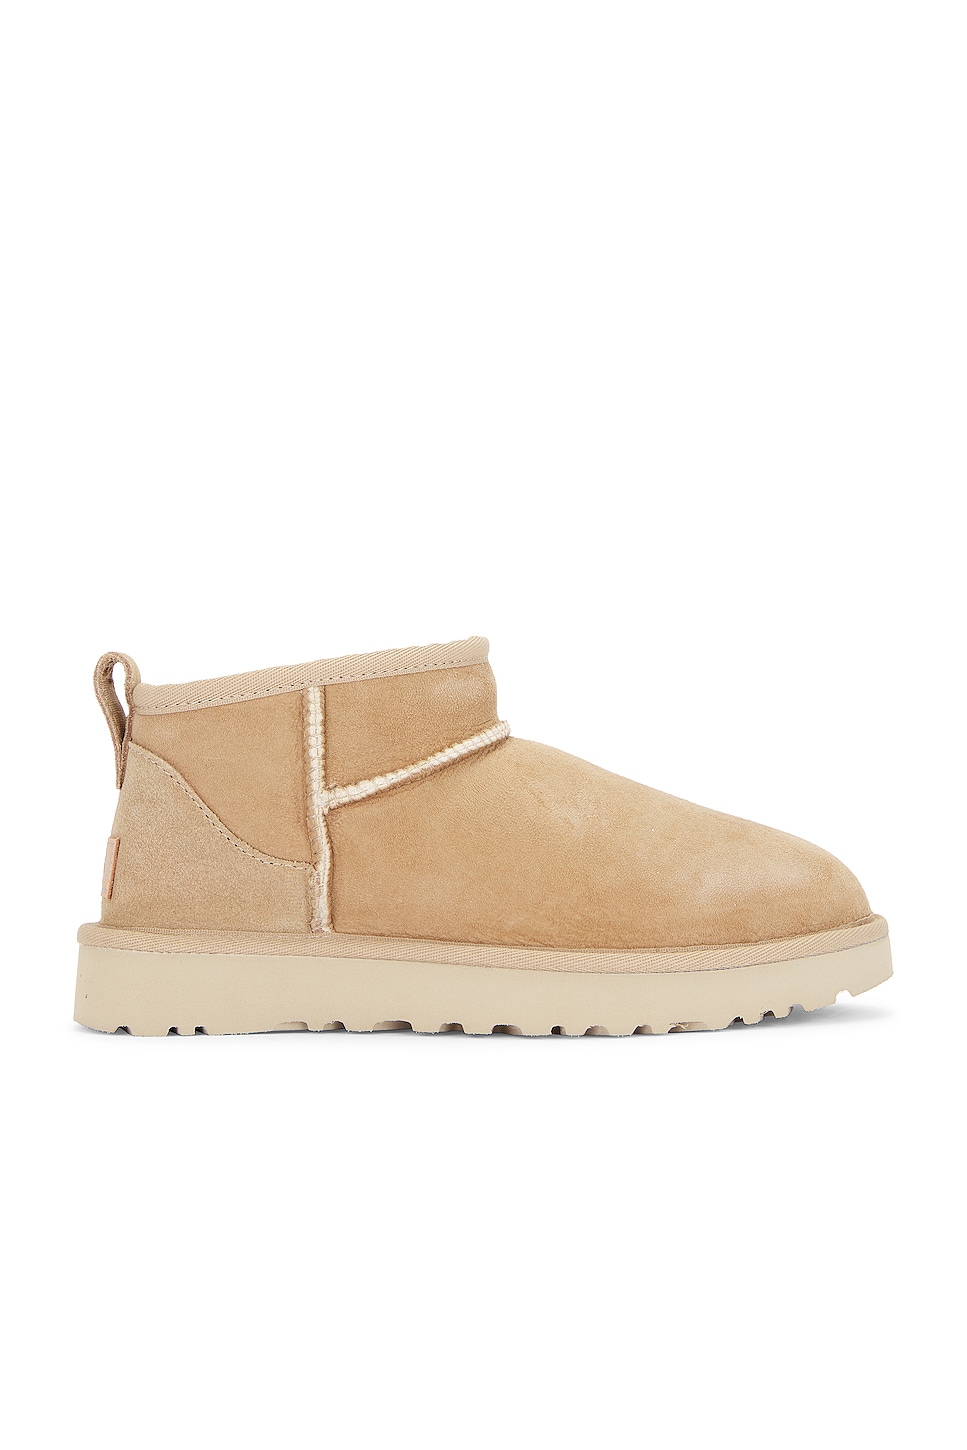 Image 1 of UGG Classic Ultra Mini Boot in Sand